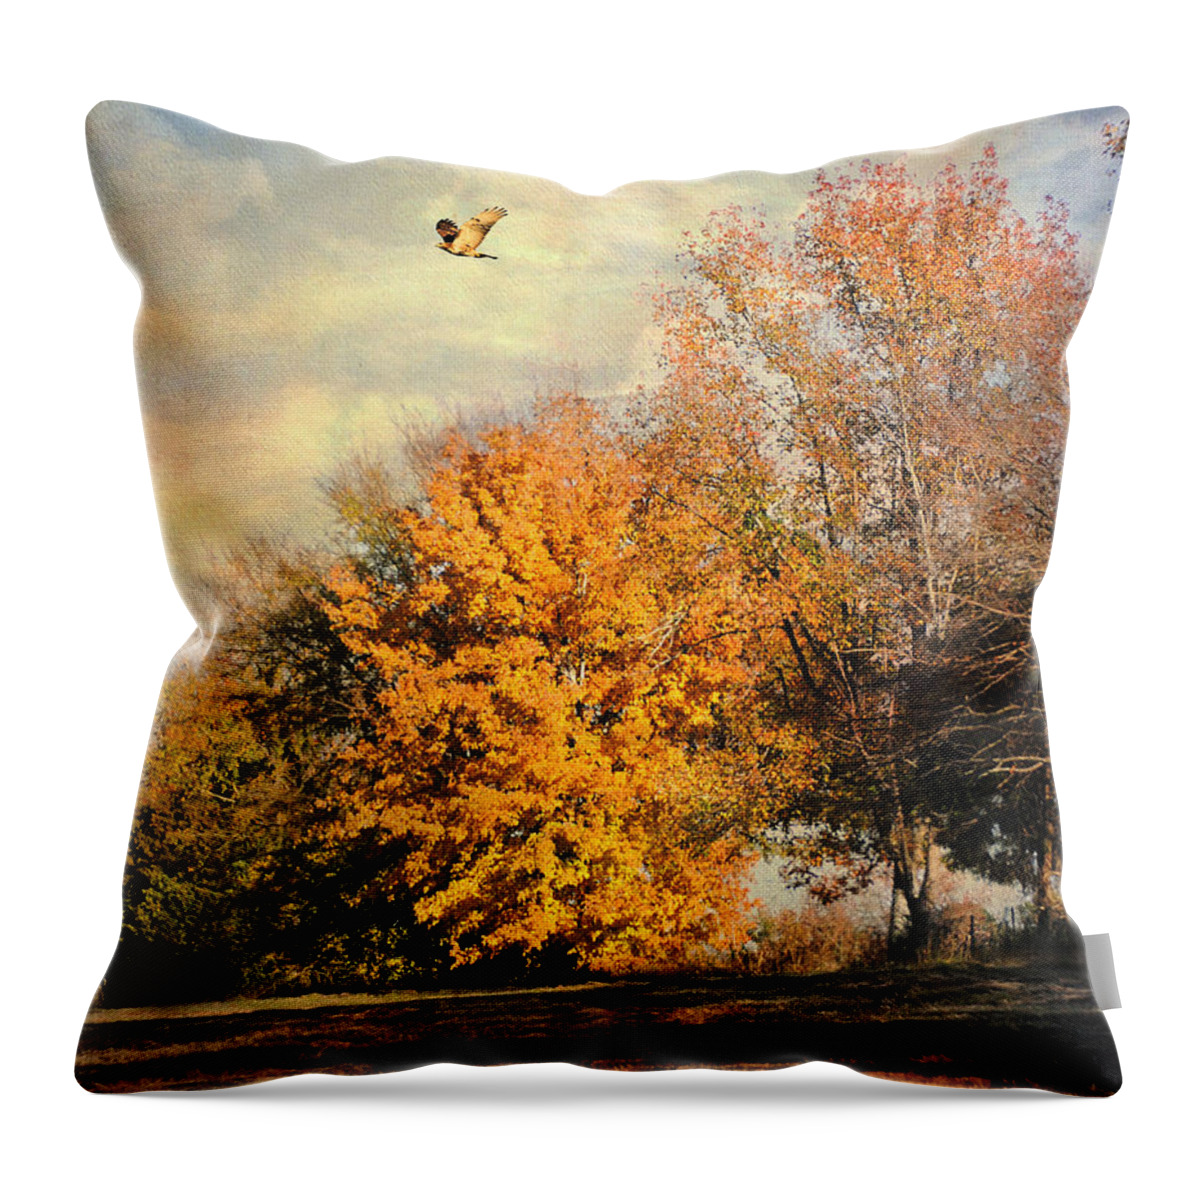 Autumn Throw Pillow featuring the photograph Over the Golden Tree by Jai Johnson